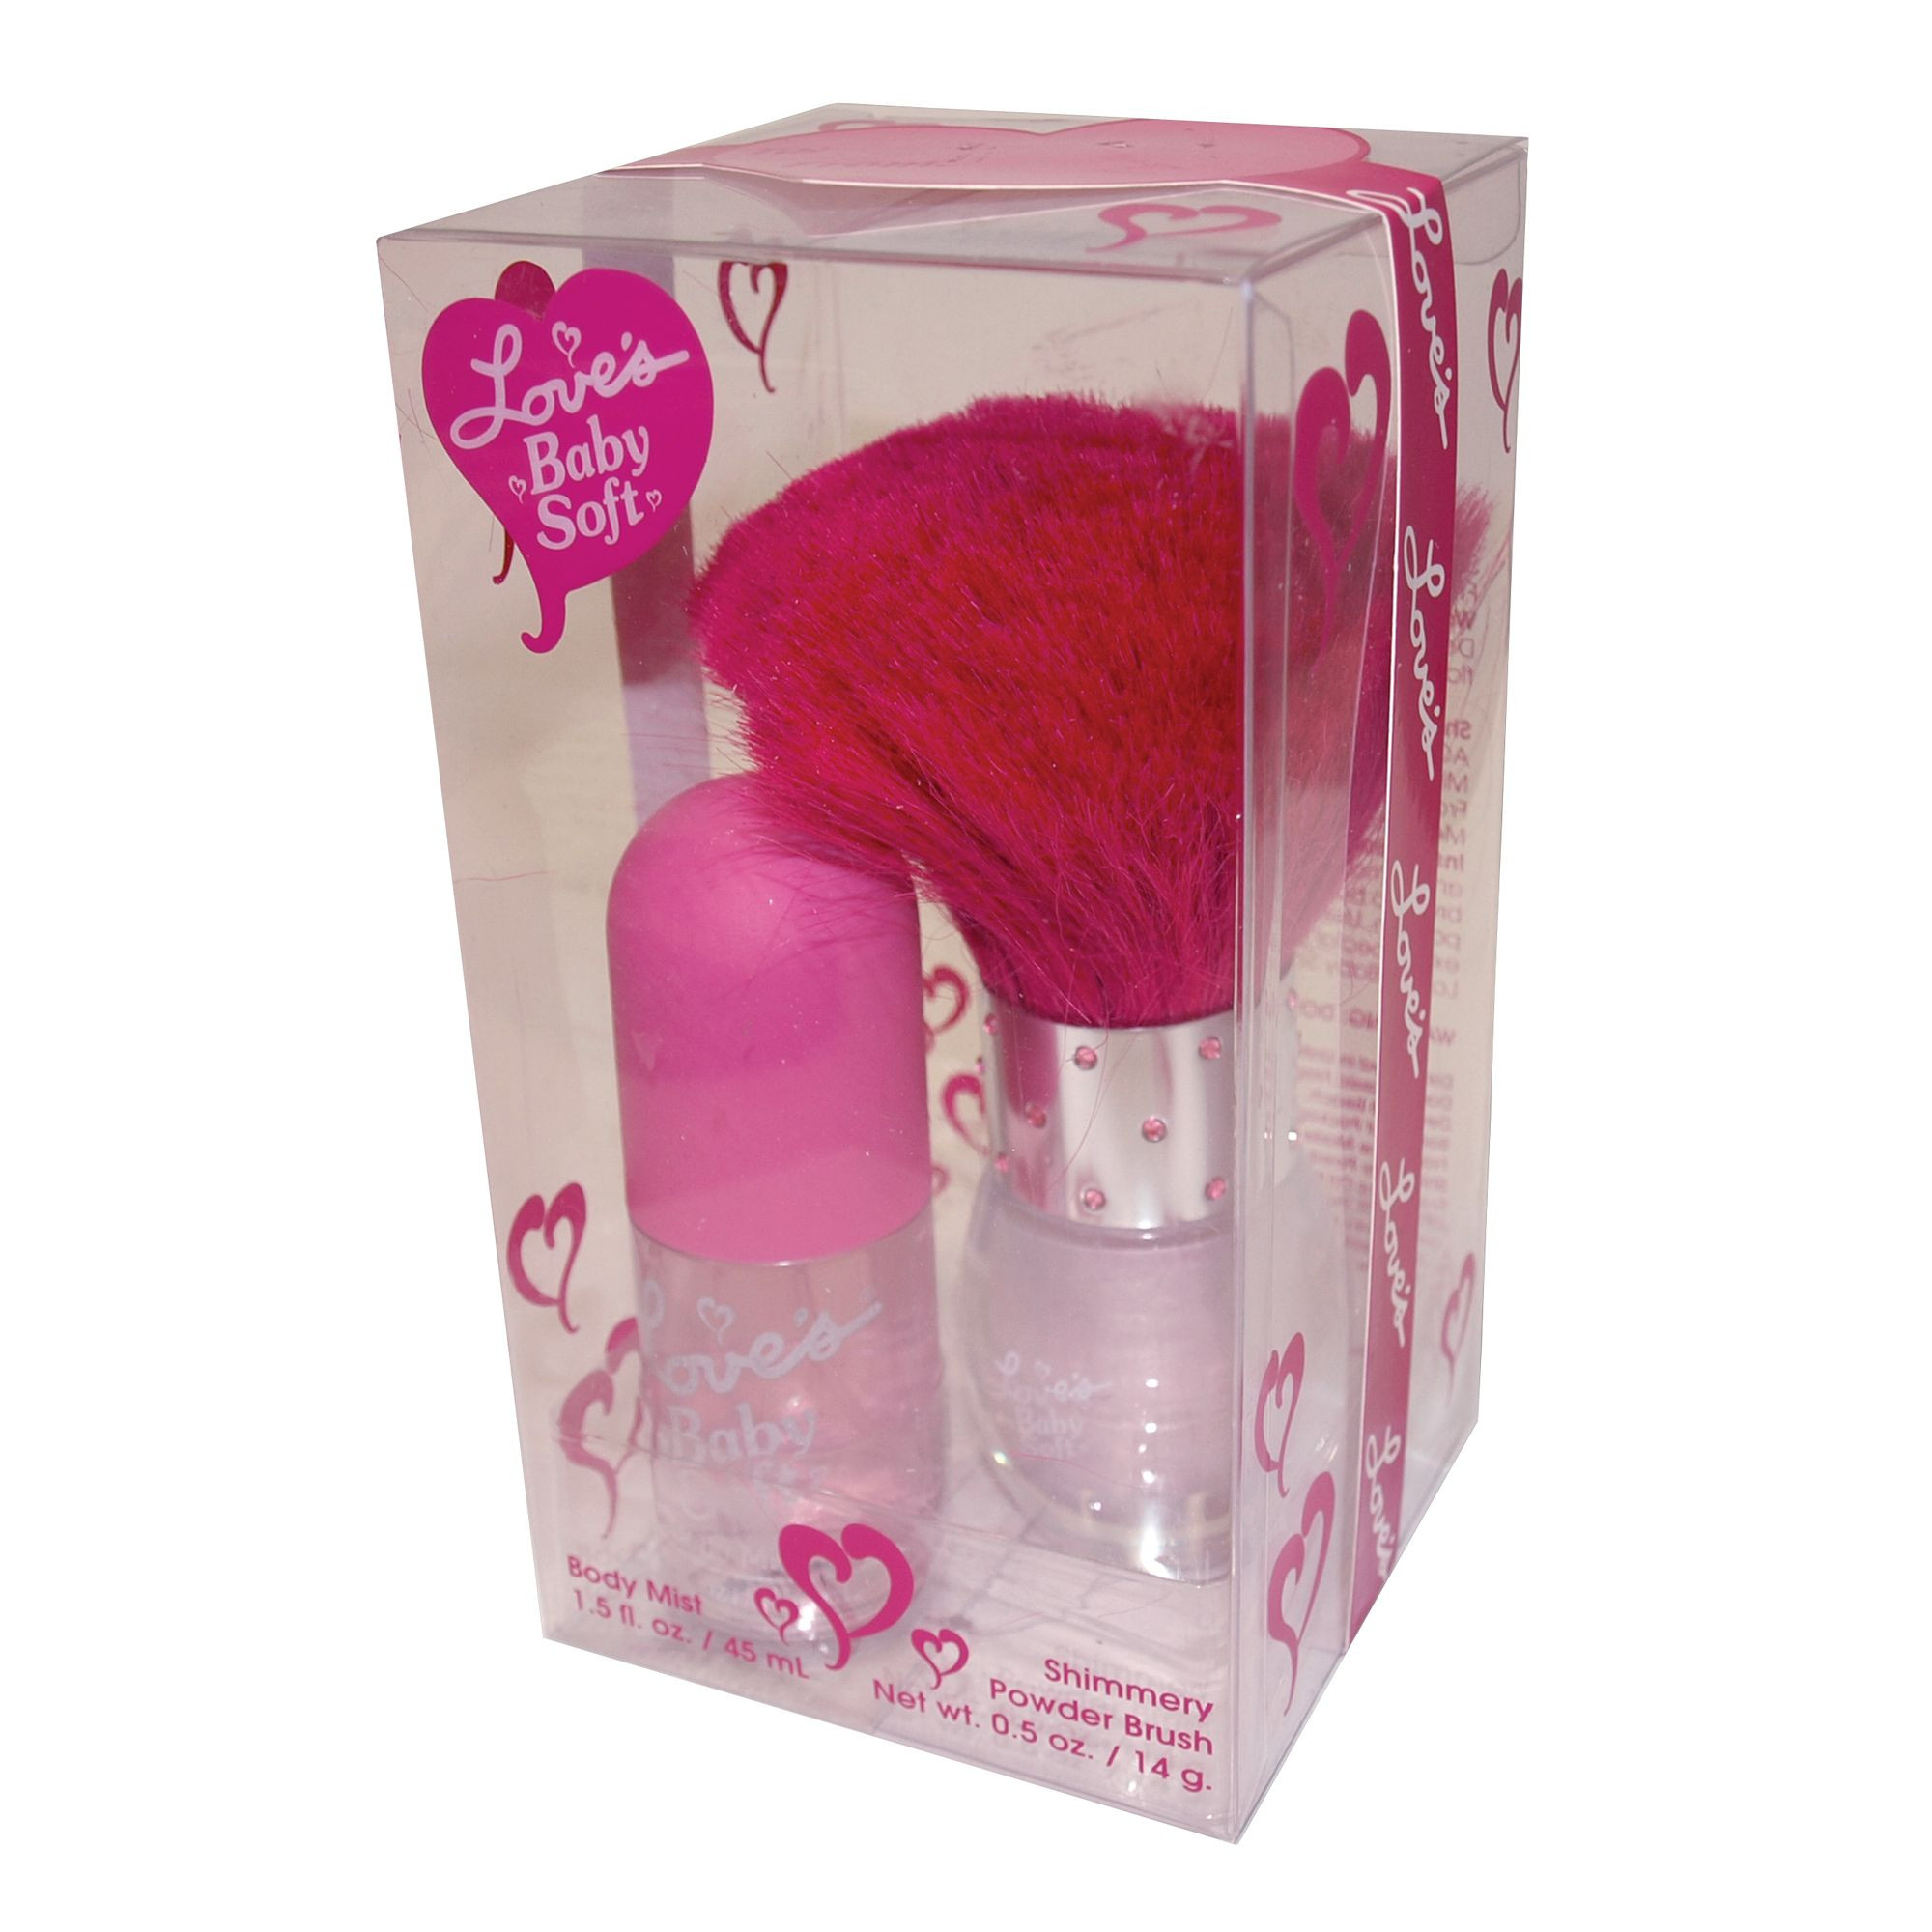 Baby Soft Perfume Gift Sets
 Love s Baby Soft Gift Set